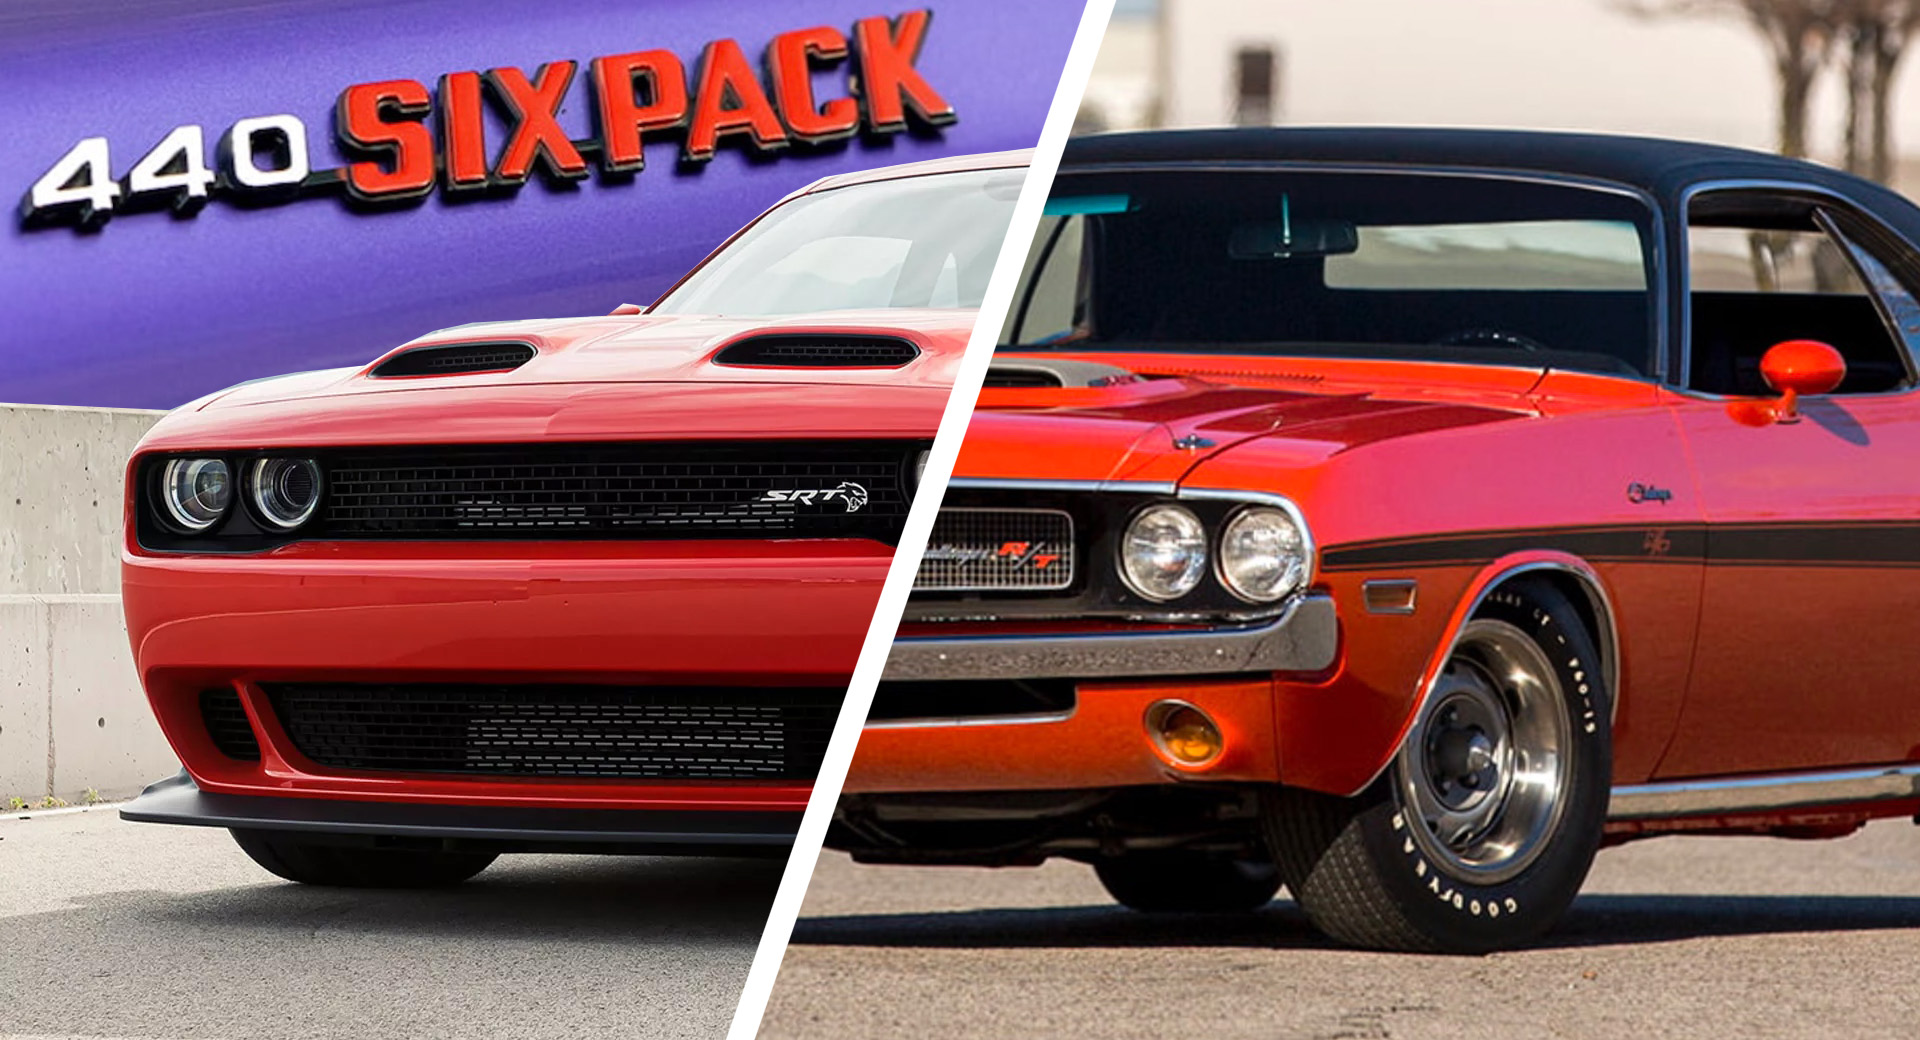 Dodge Challenger Shakedown is first of the brand's last V8 muscle cars